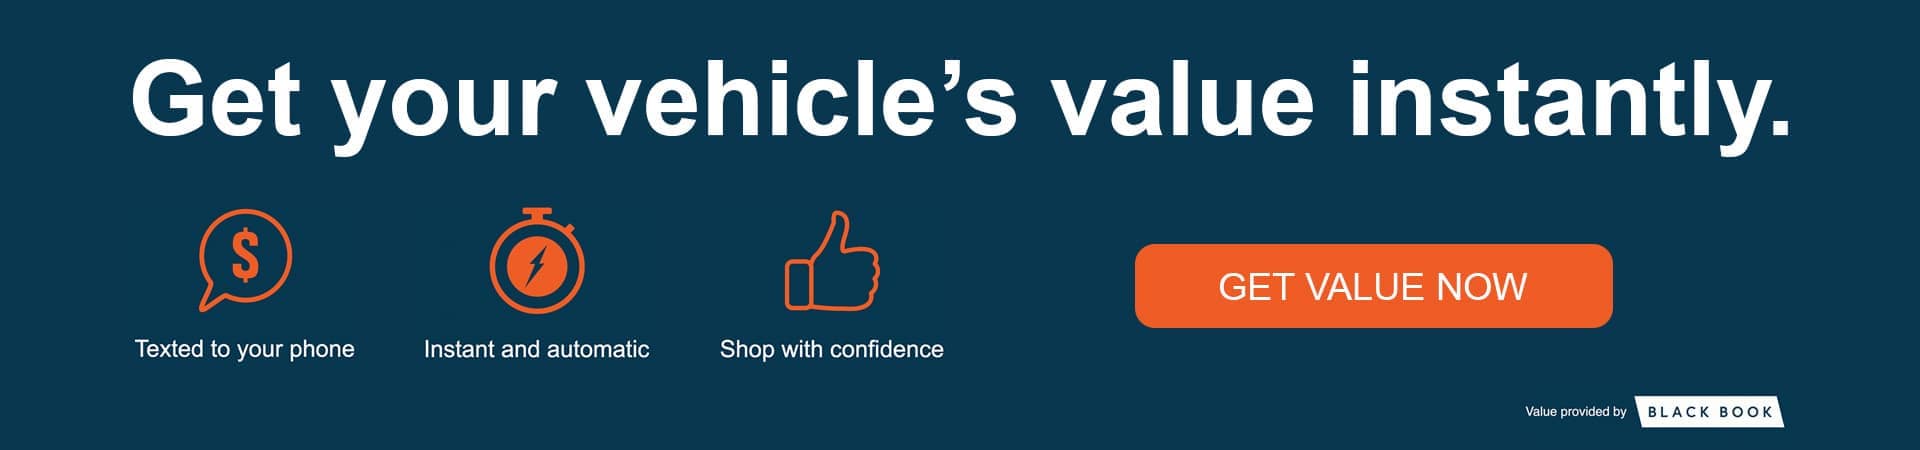 Get you vehicle's value instantly.